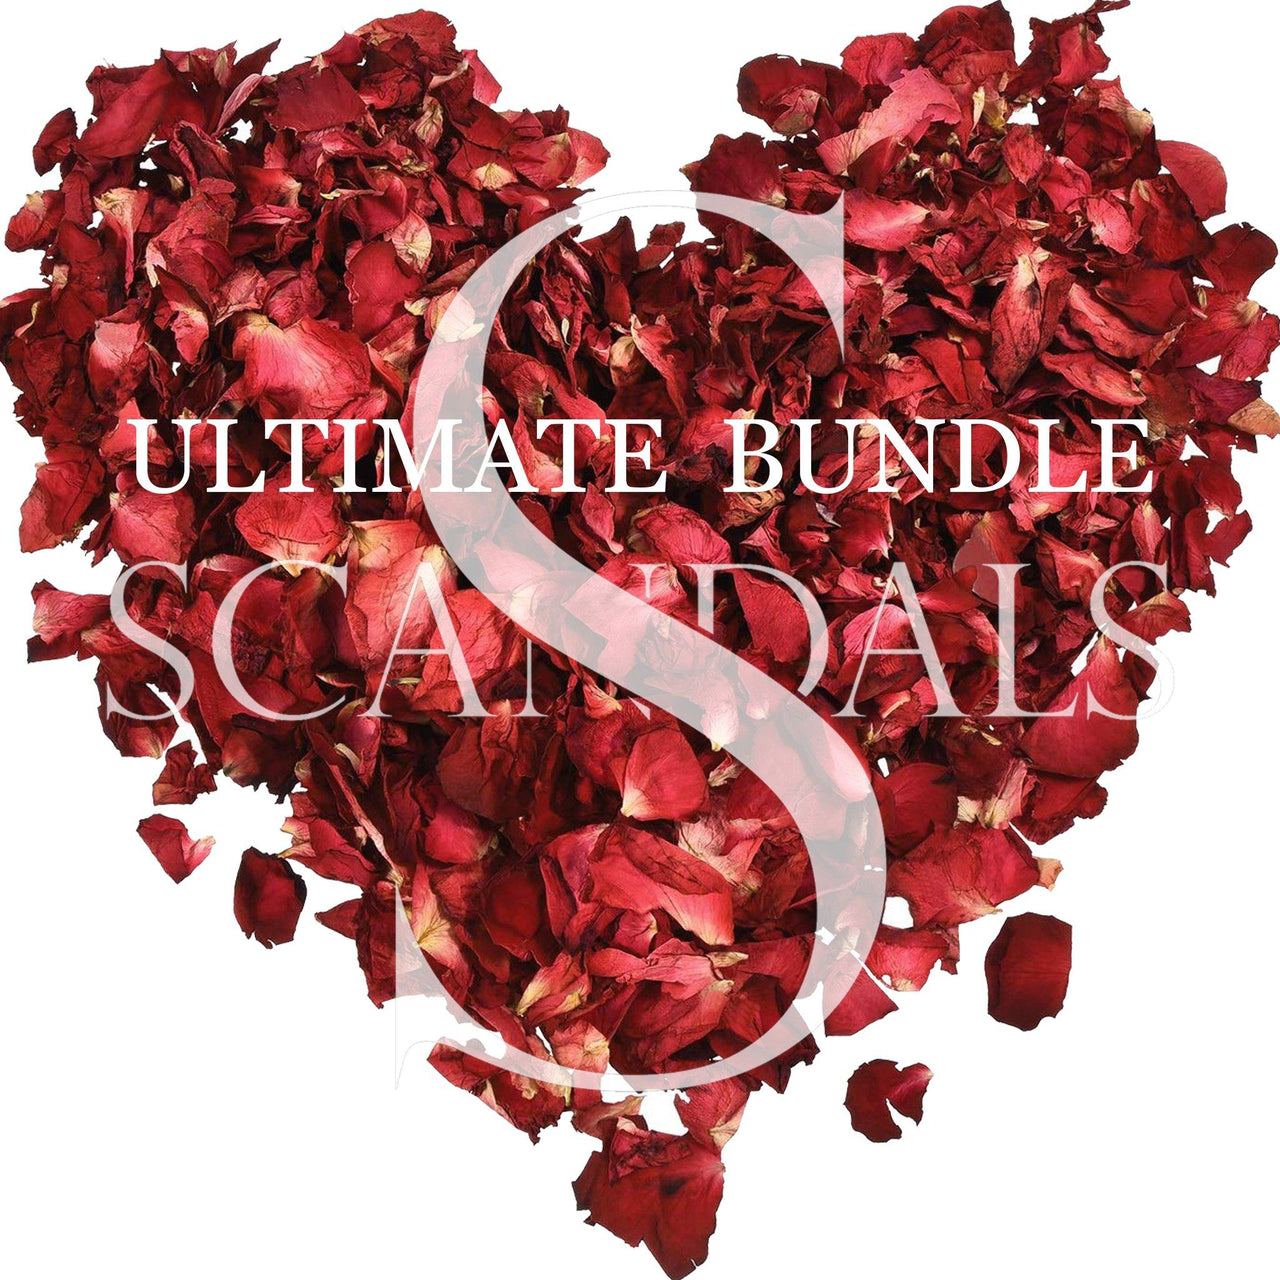 The Scandals Ultimate Bundle